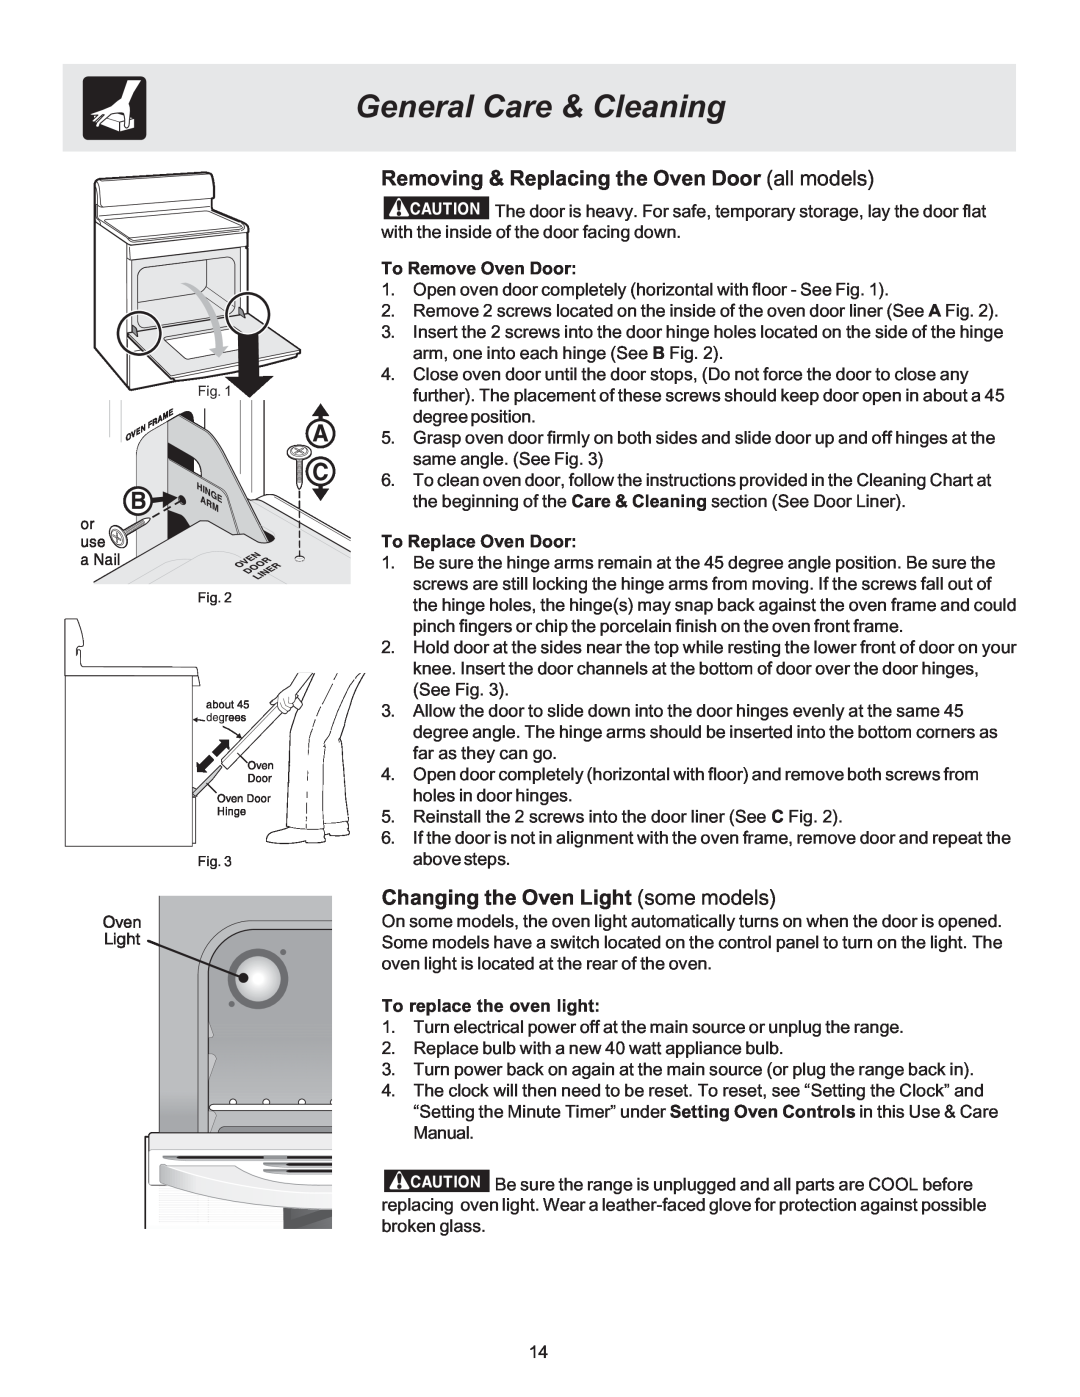 Frigidaire 316417134 General Care & Cleaning, Removing & Replacing the Oven Door all models, To Remove Oven Door 